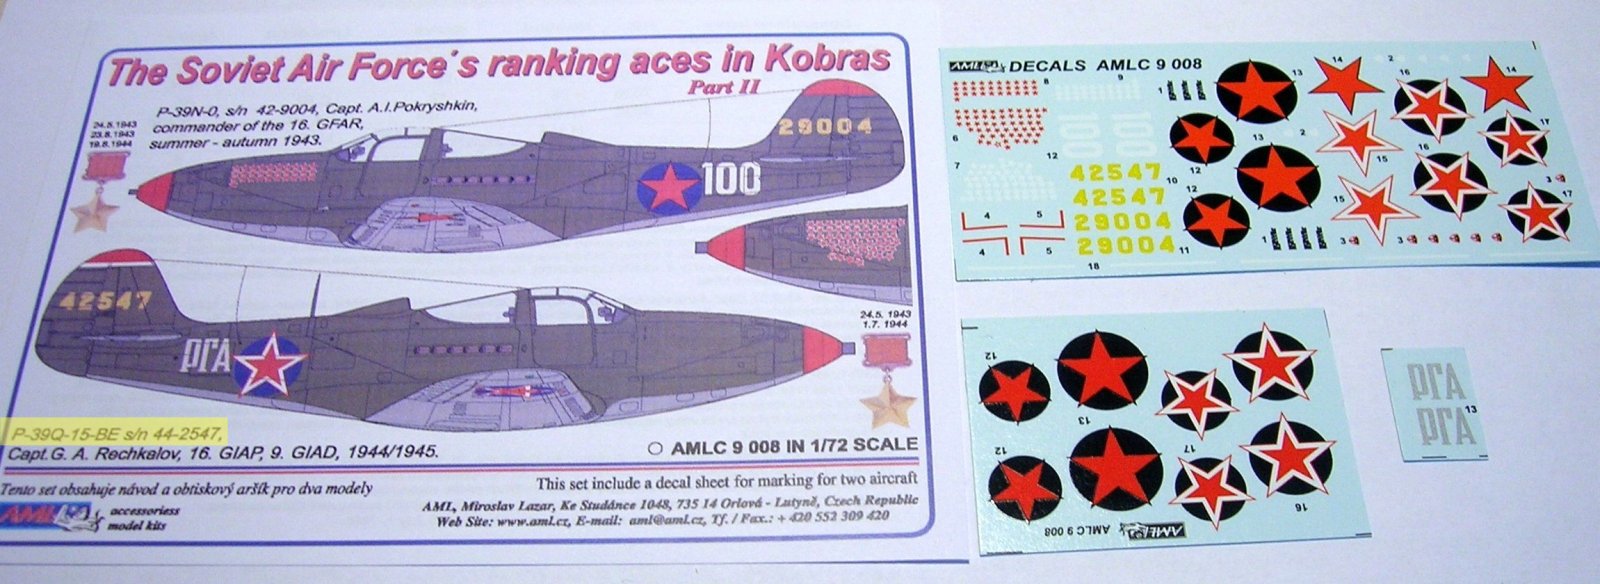 [Arma Hobby] Bell P39N 1/72 - Page 2 _decal13